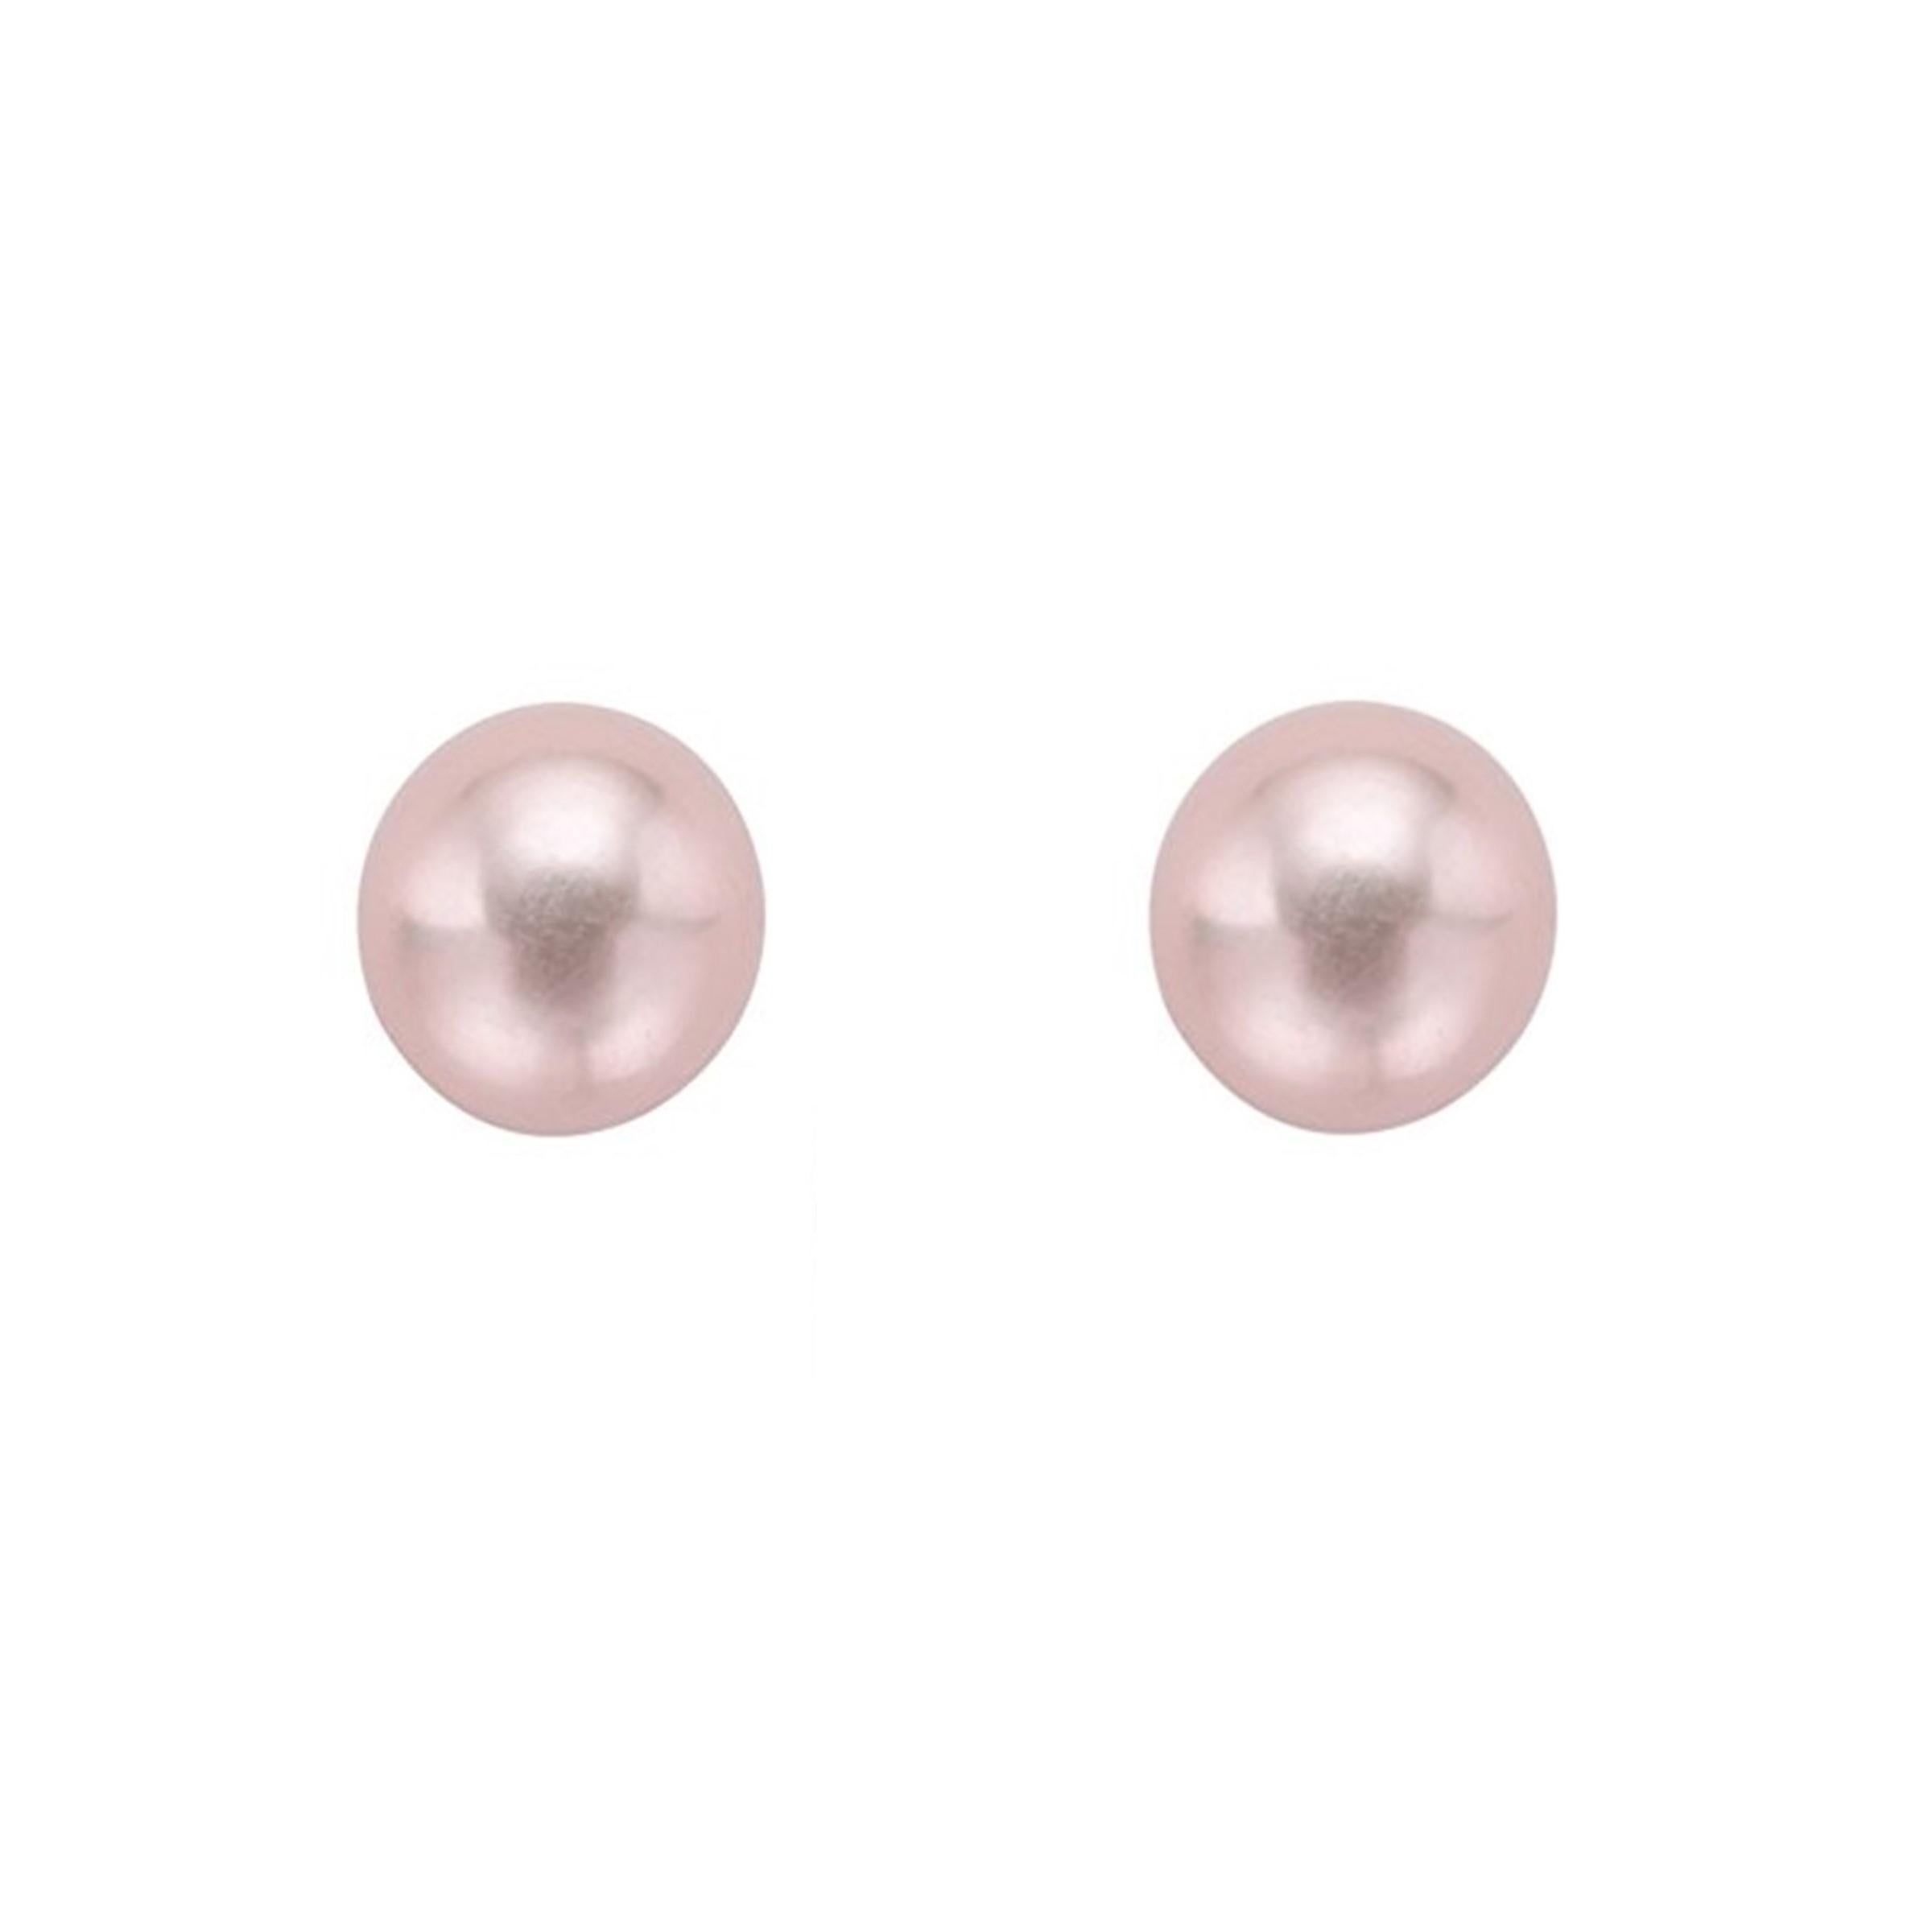 AAA Quality Freshwater Cultured Pearl Earring Stud on 14 Karat Yellow Gold

Simplicity and understated elegance have never made such a perfect combination. A beautiful pair of cultured freshwater pearl studs set on 14K yellow gold stud backings. The